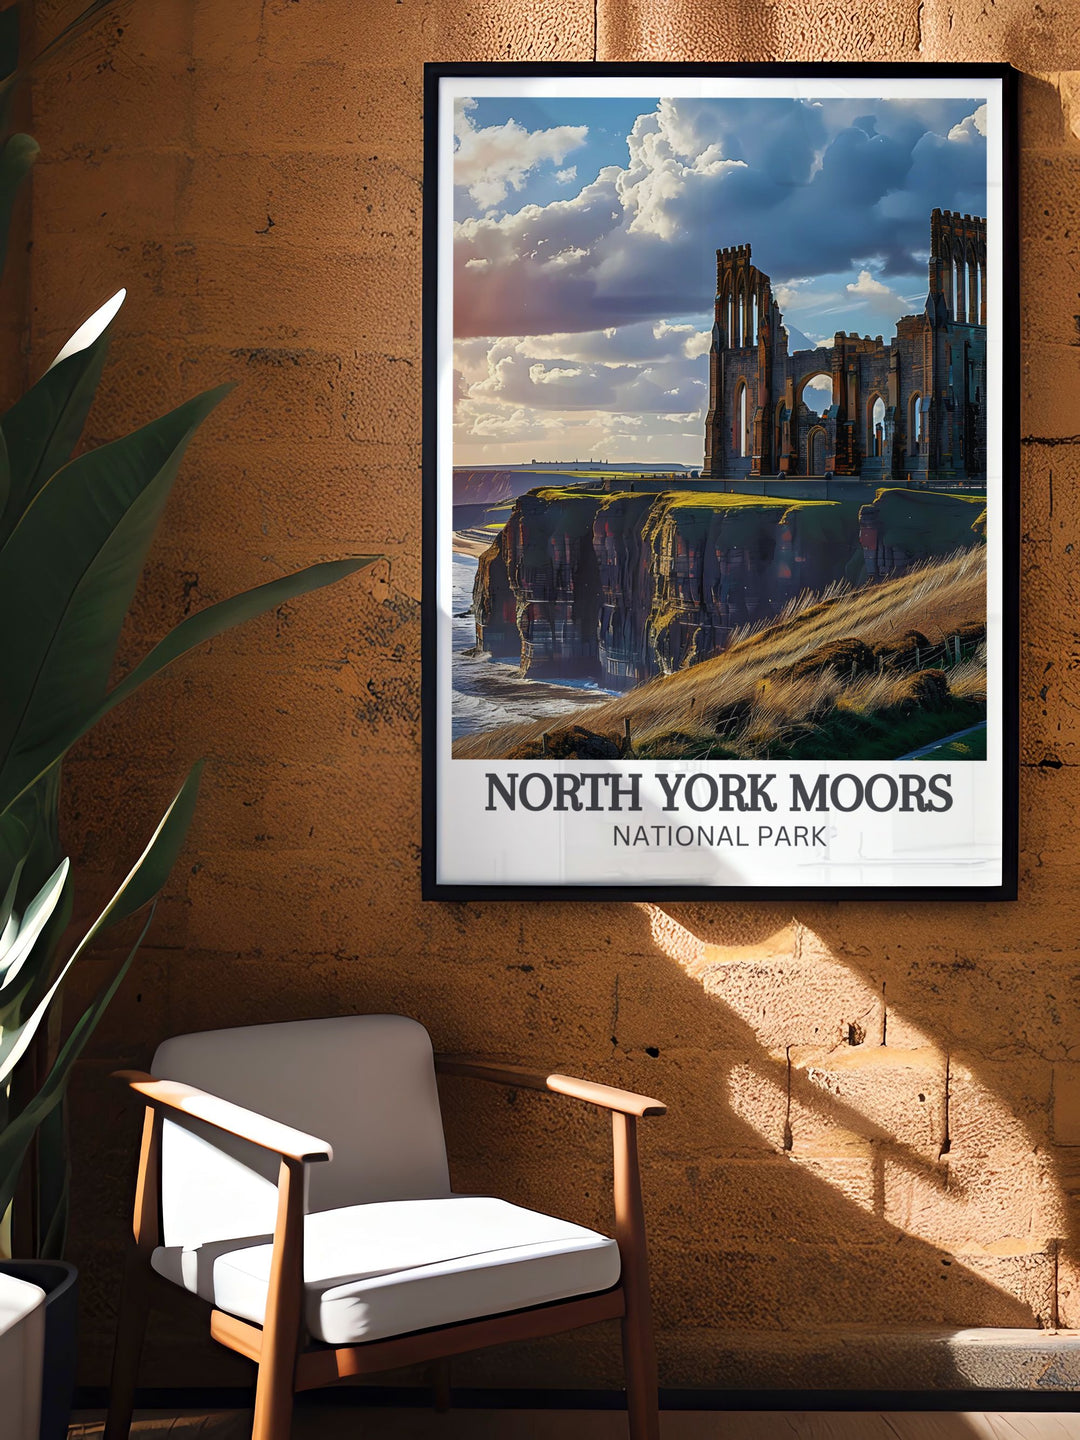 Dive into the storied past of Whitby Abbey with this travel poster, capturing the Gothic architecture and the awe inspiring location that has inspired countless visitors and artists alike.